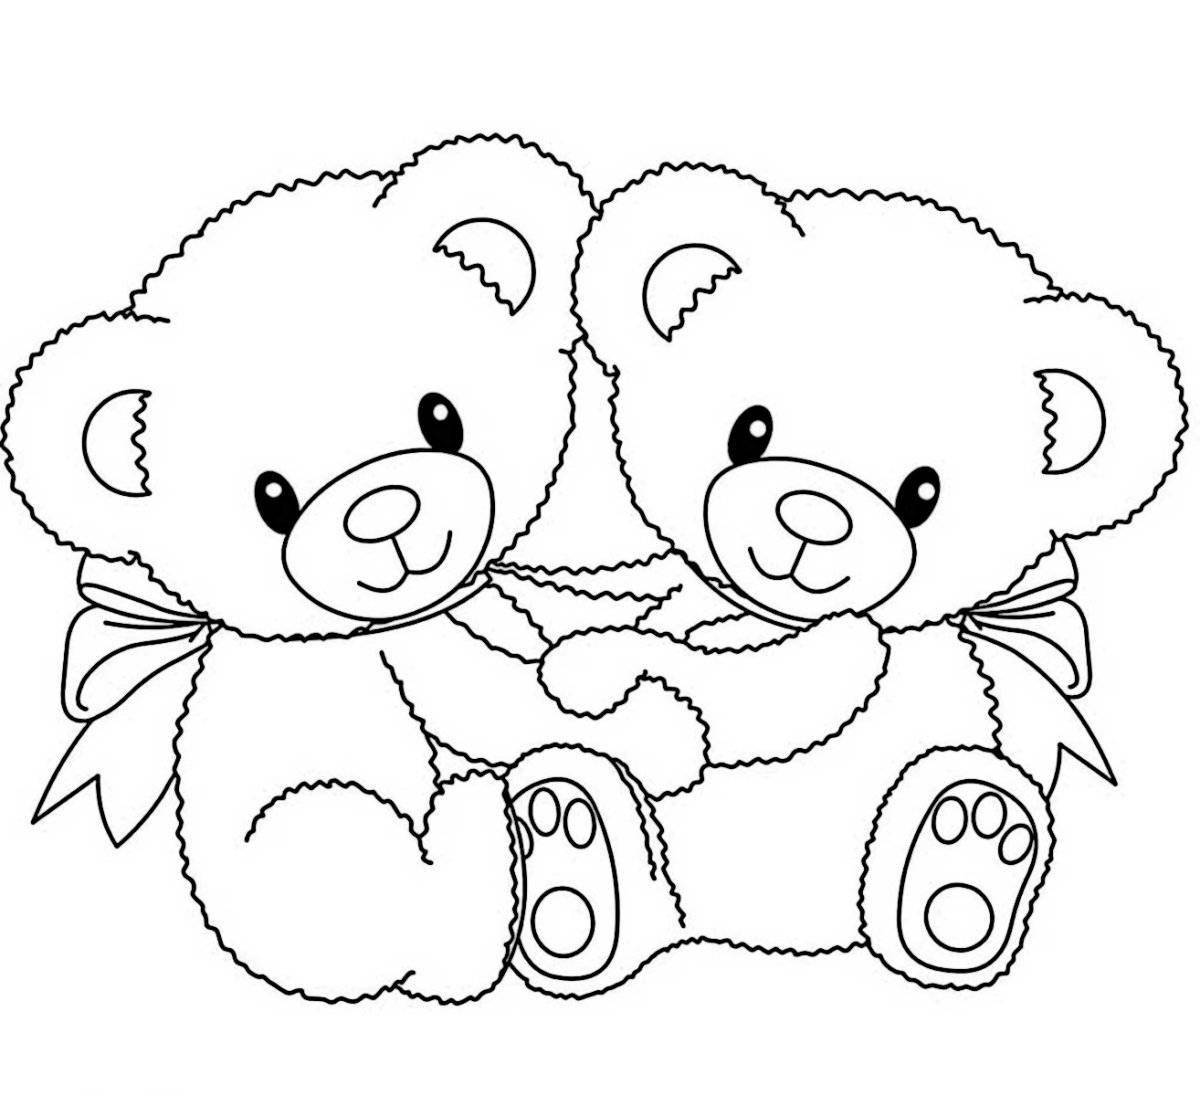 Coloring page adorable bear with a gift